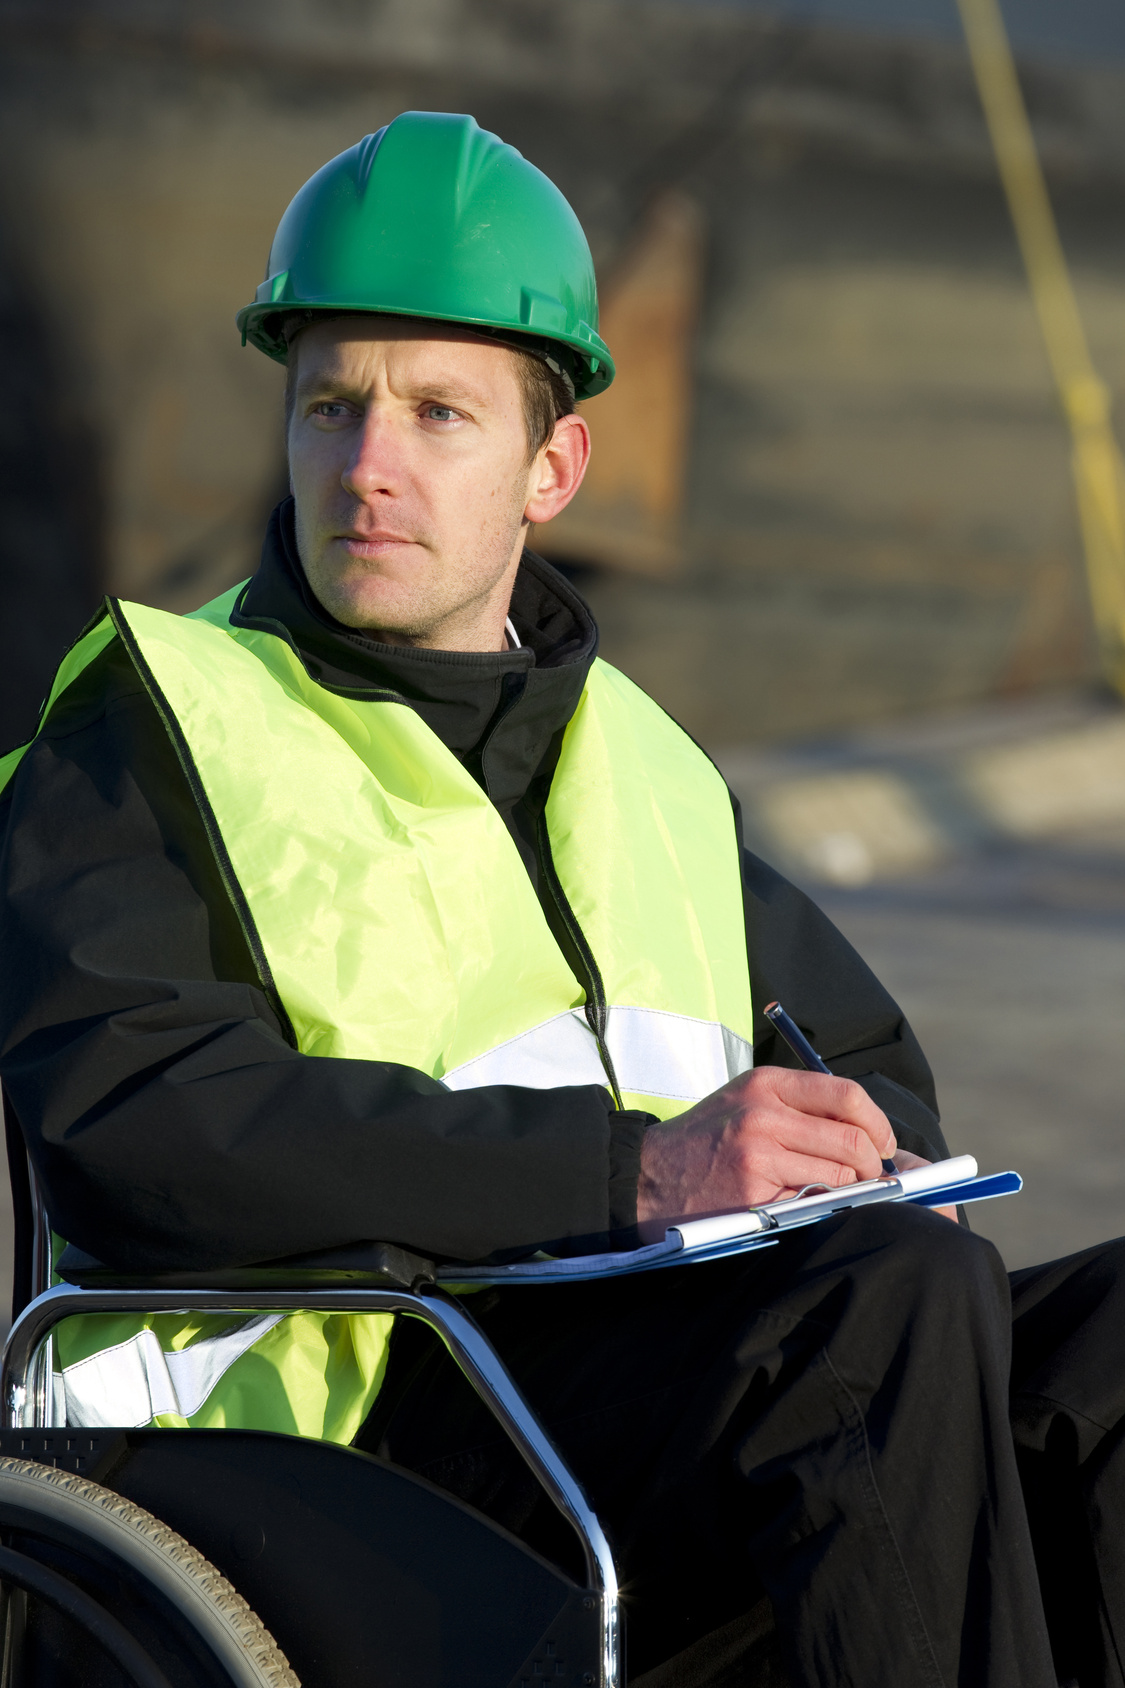 When your condition affects your work, it's time to apply for disability benefits.